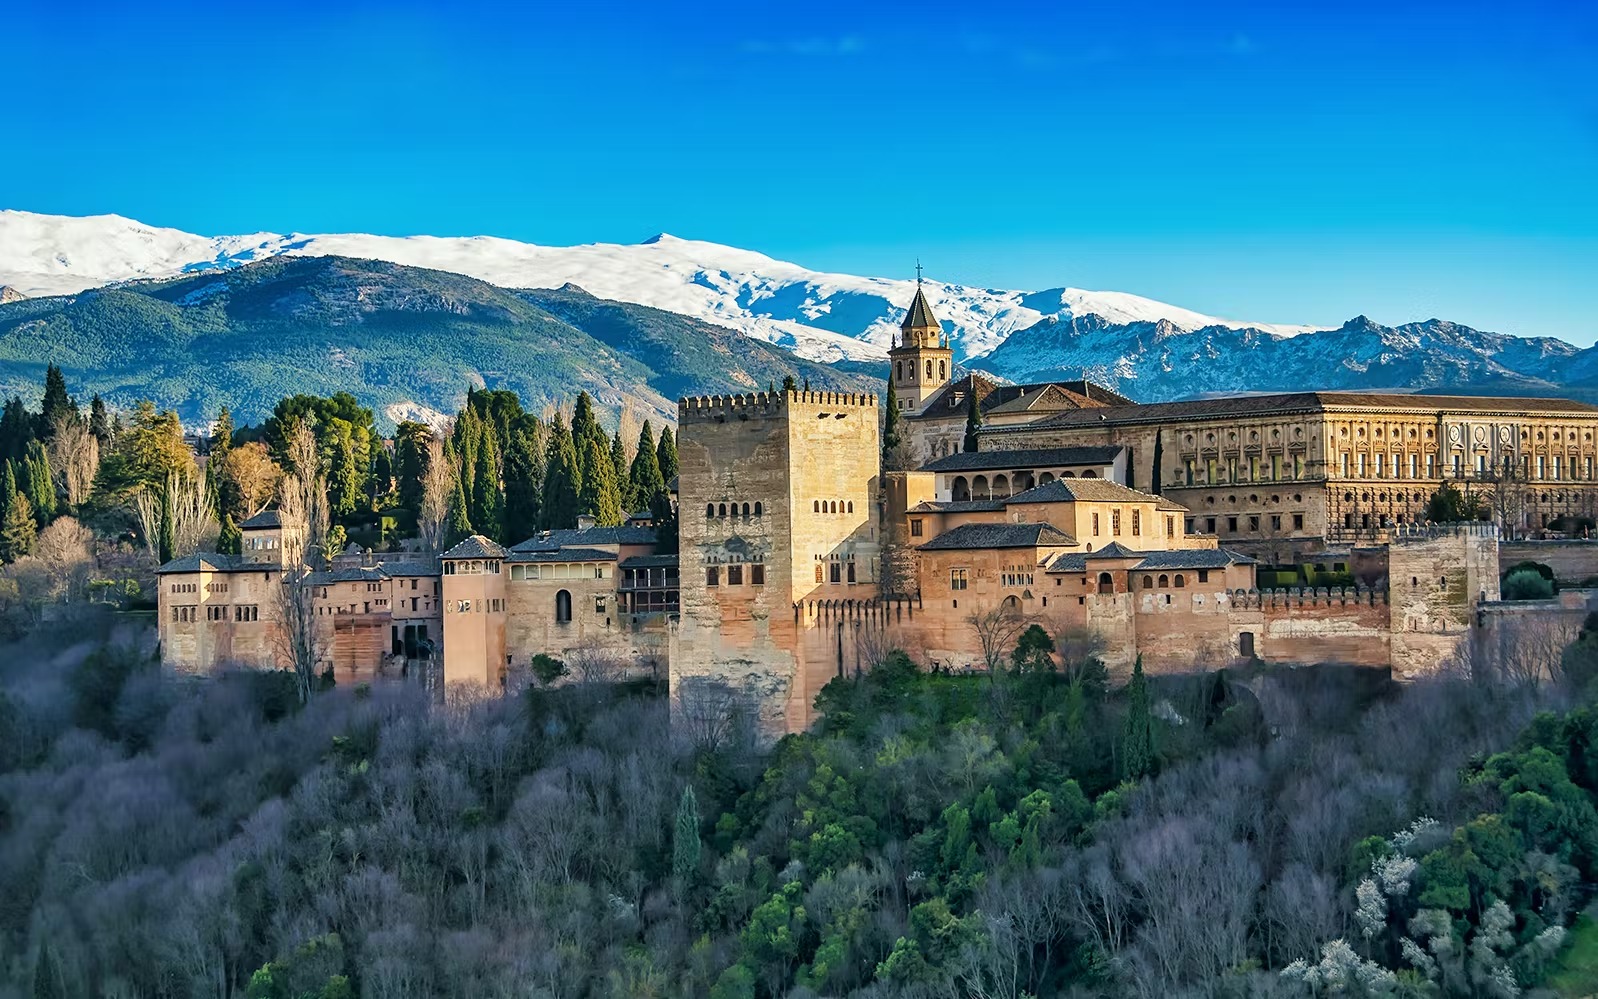 Can You Pass This 40-Question Geography Test That Gets Progressively Harder With Each Question? Alhambra, Granada, Spain